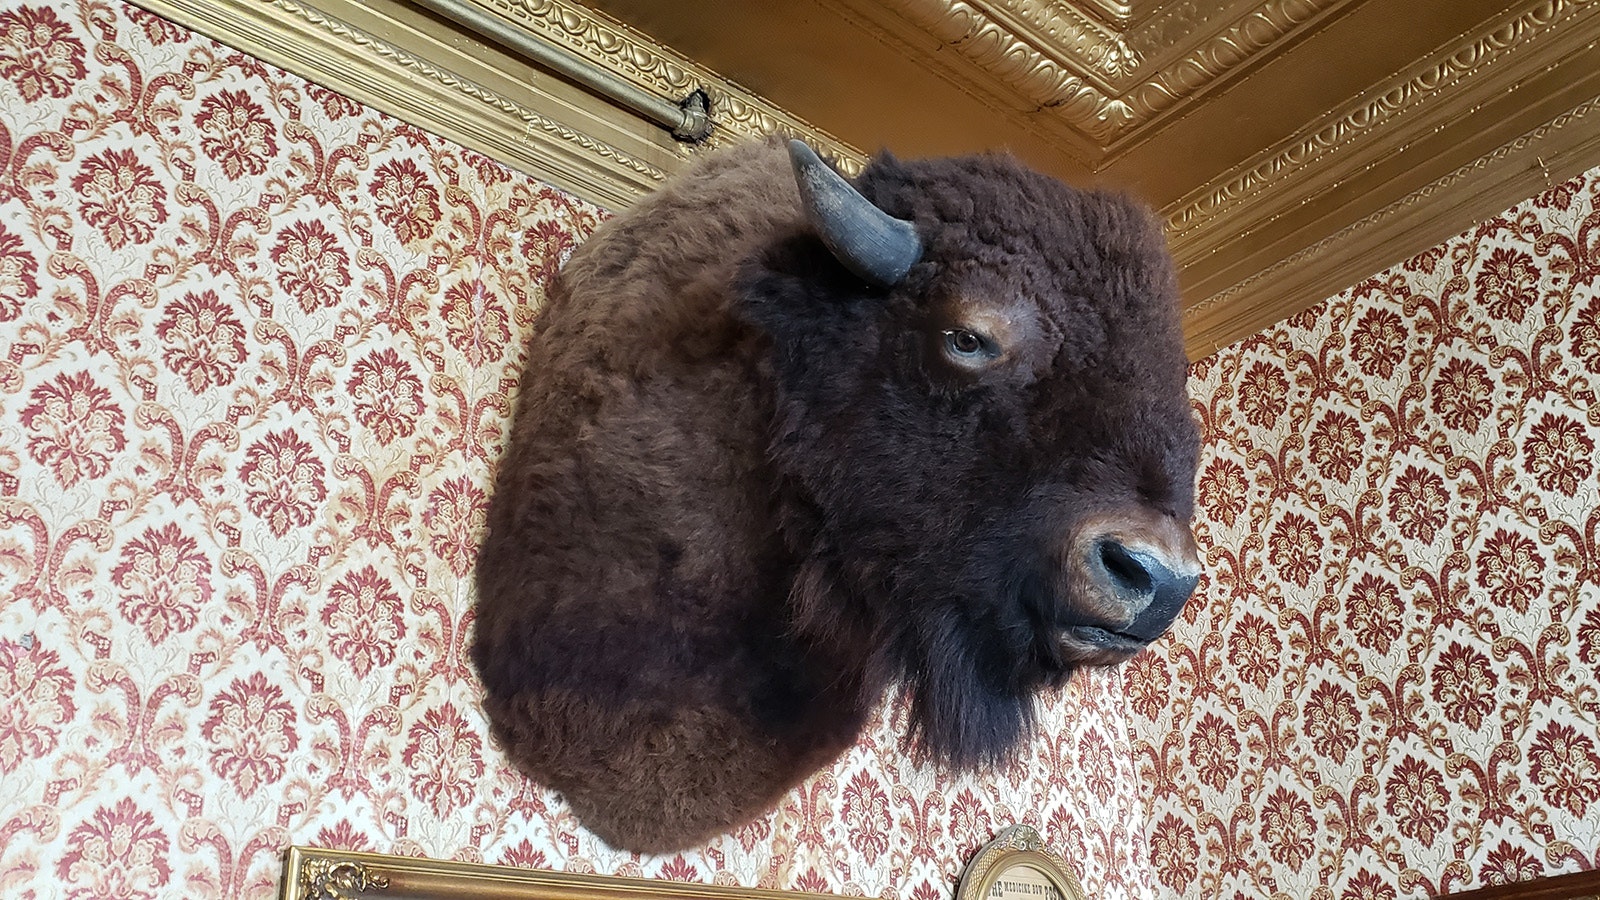 There are lots of stuffed taxidermy animals at The Virginian. This one seems to always be watching.